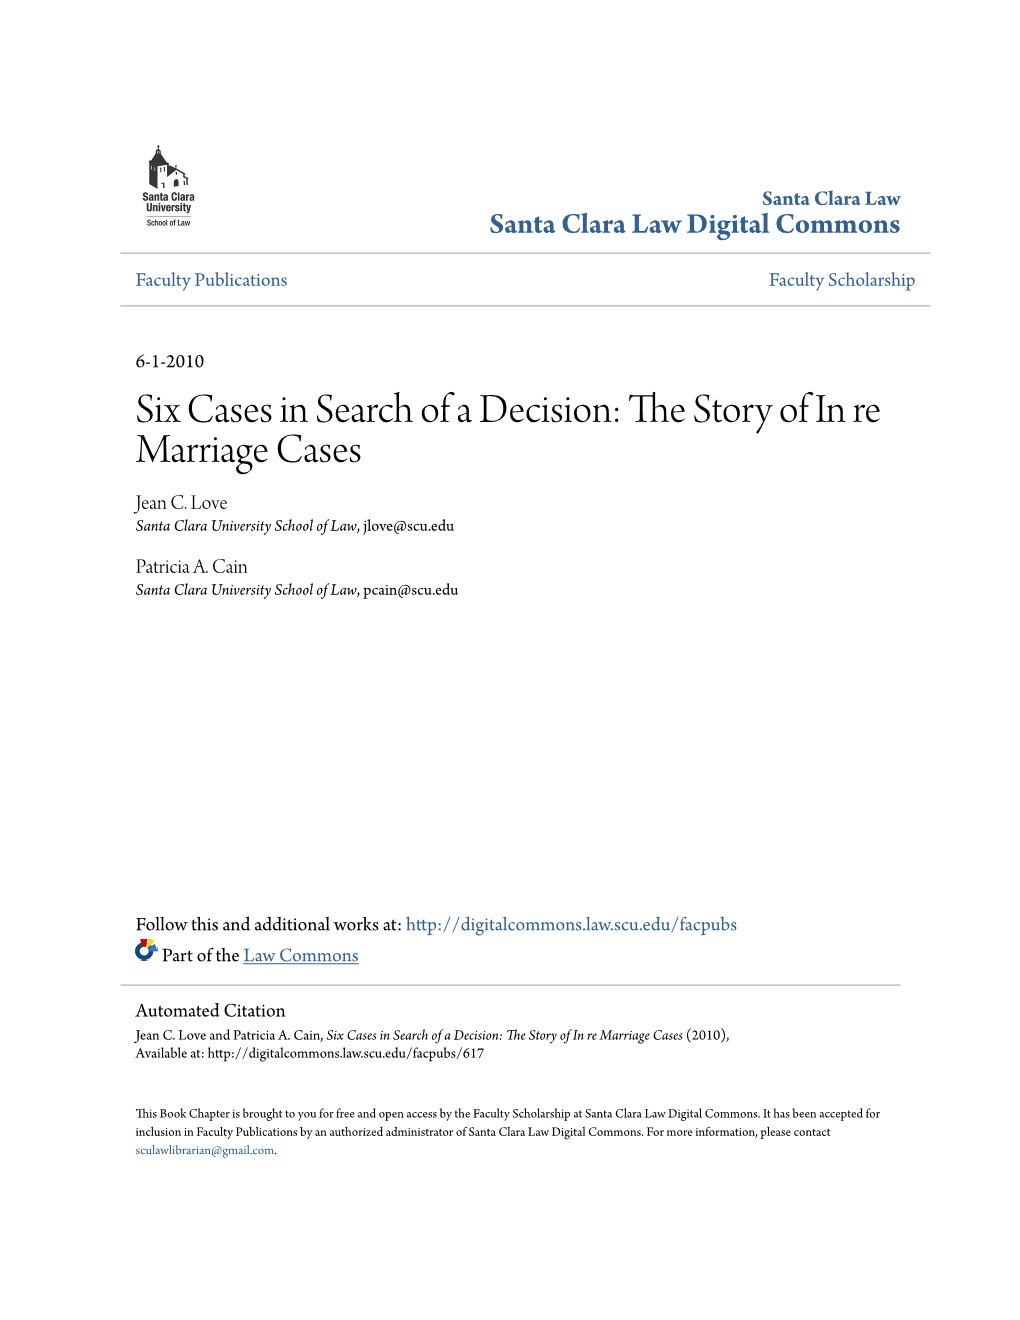 The Story of in Re Marriage Cases (2010), Available At